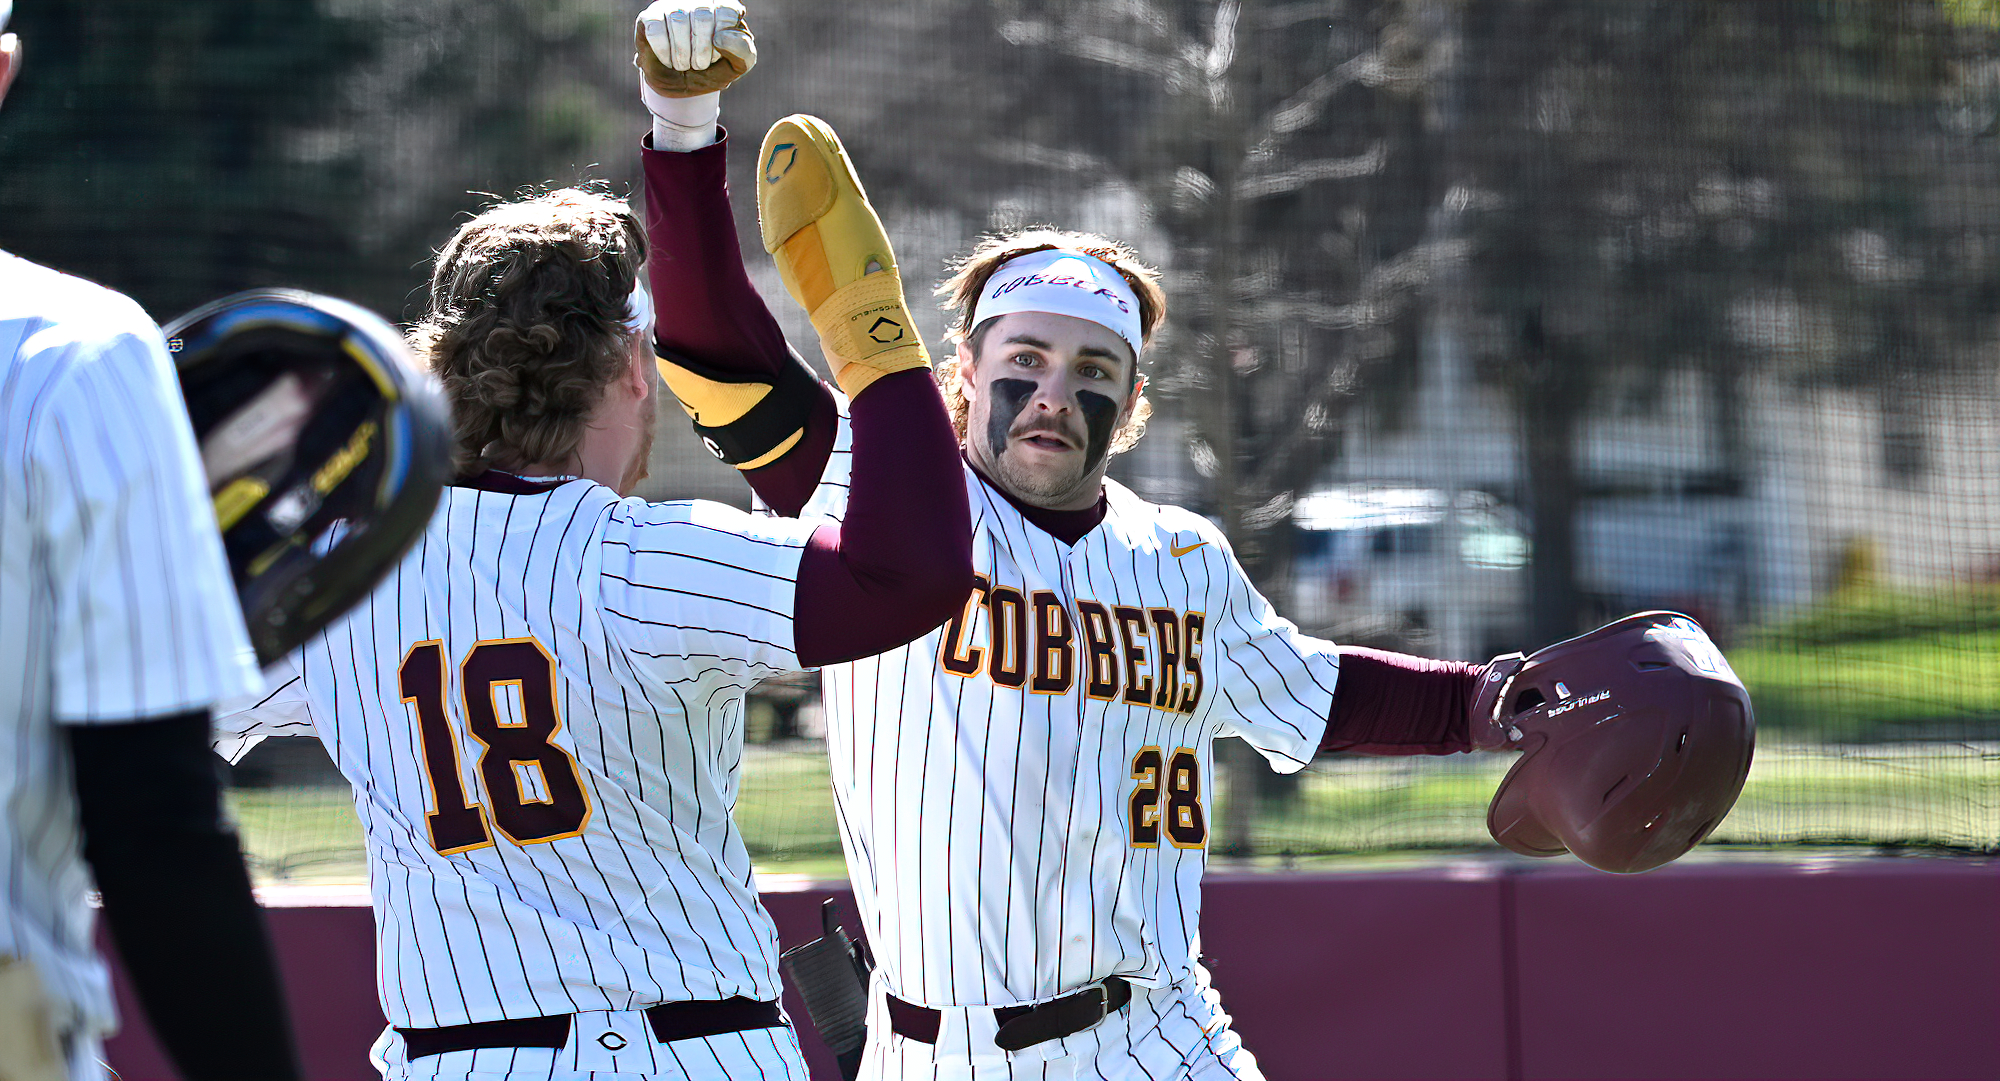 Junior David Dorsey celebrates his grand slam in Game 1 of the Cobbers' split with St. John's. Dorsey had three homers on the day.